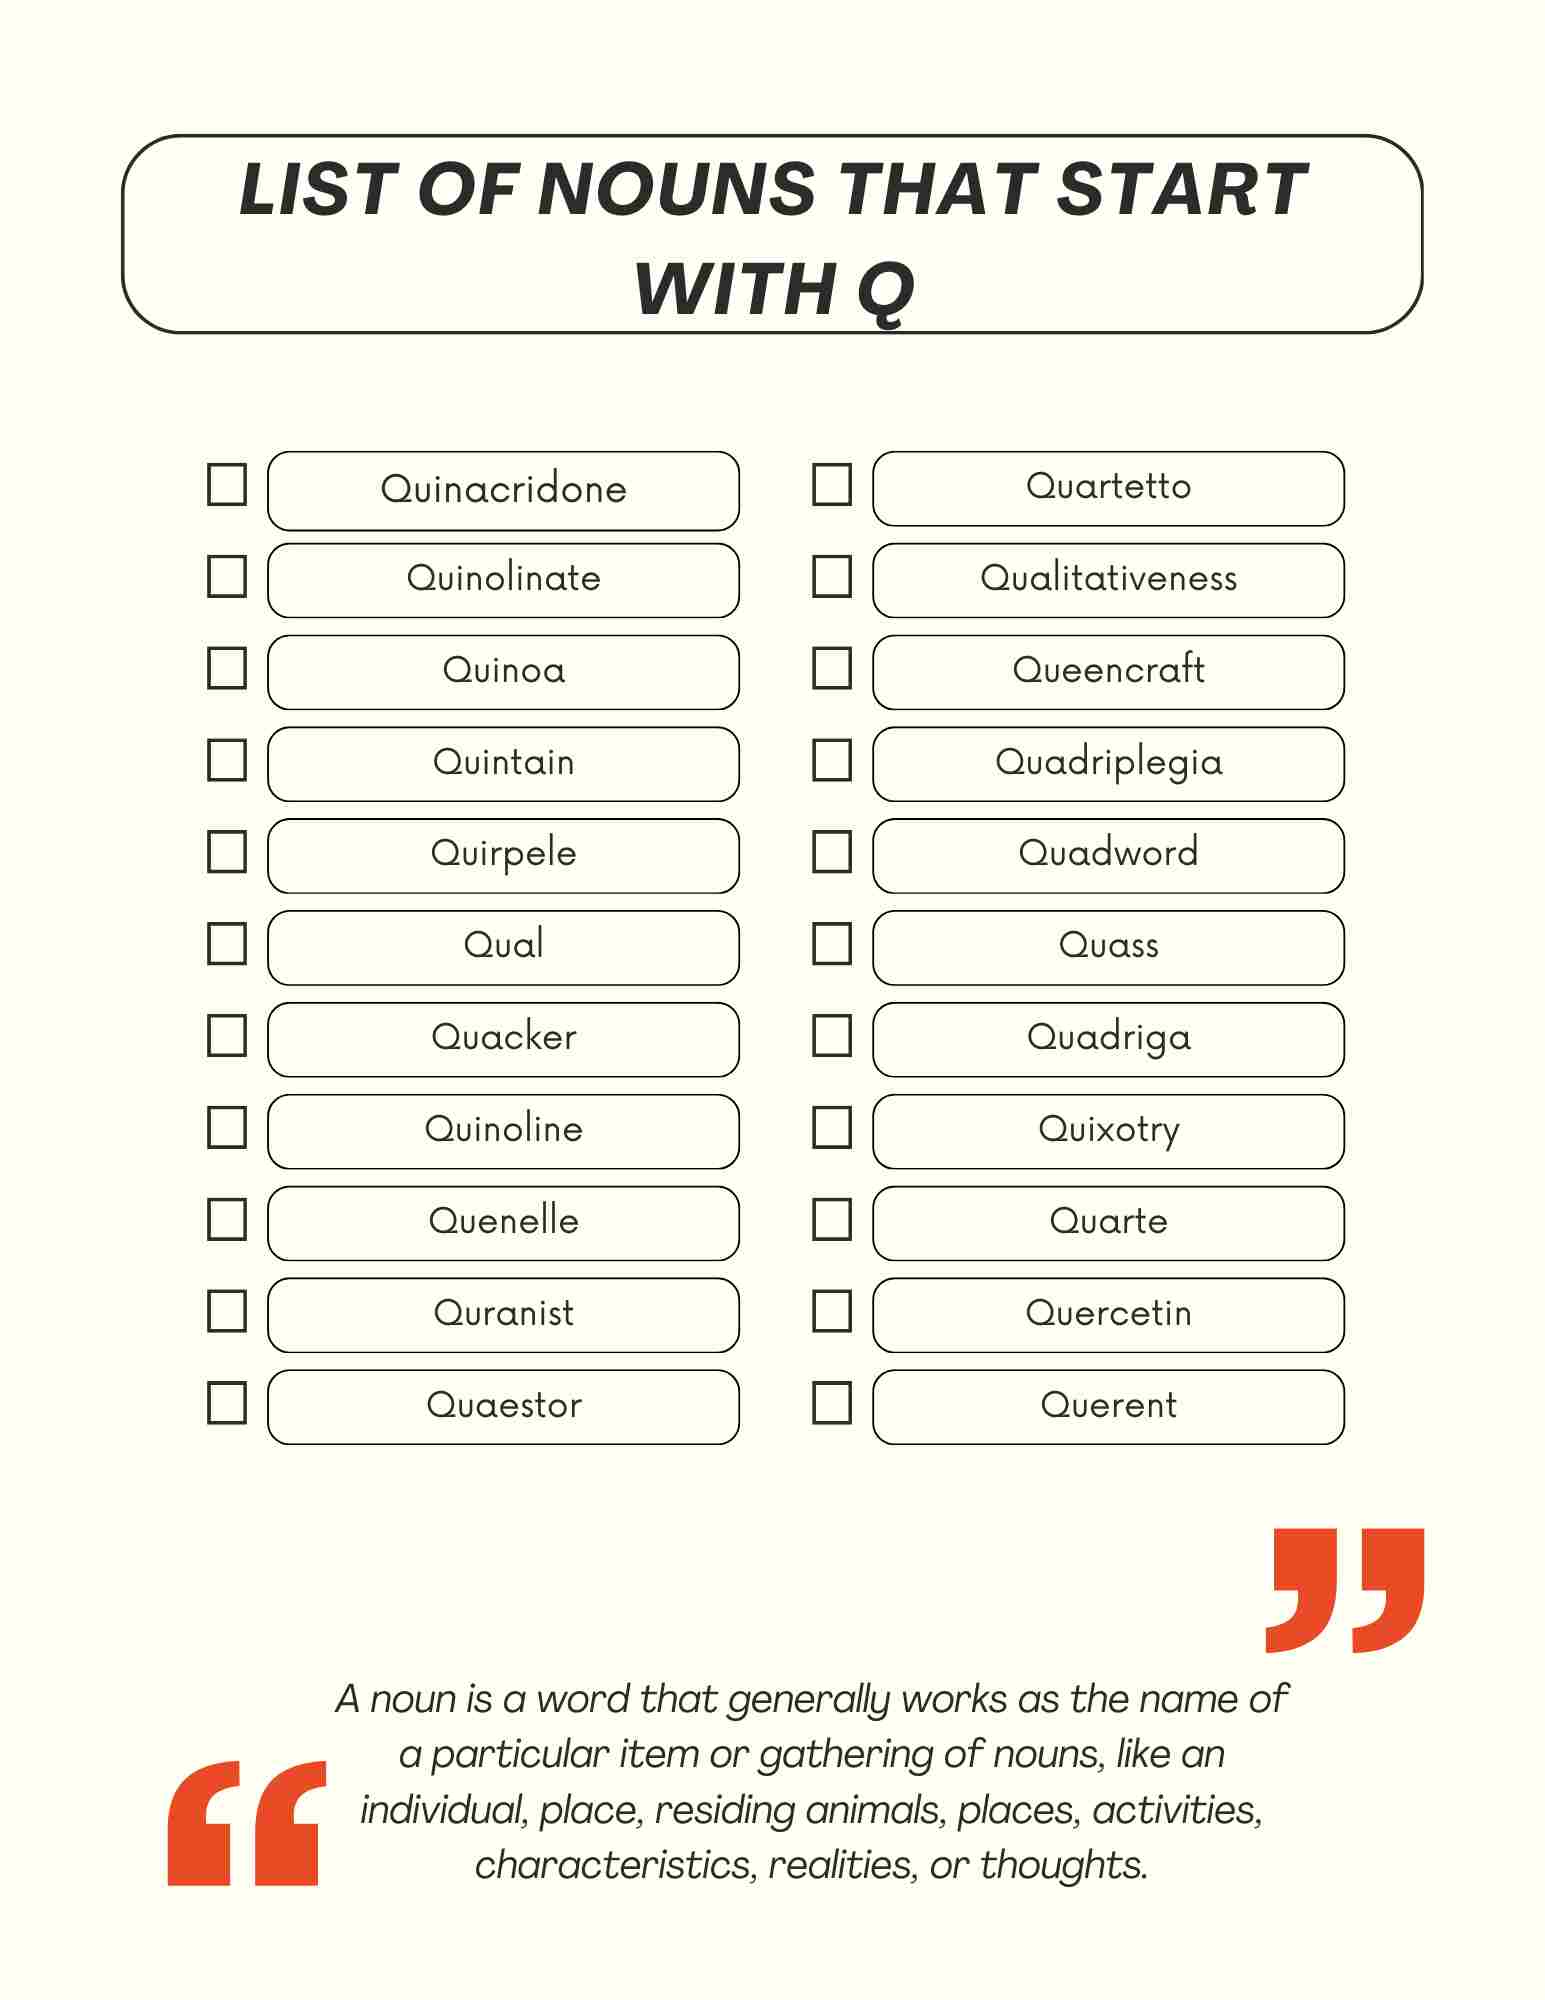 Nouns that Start With Q